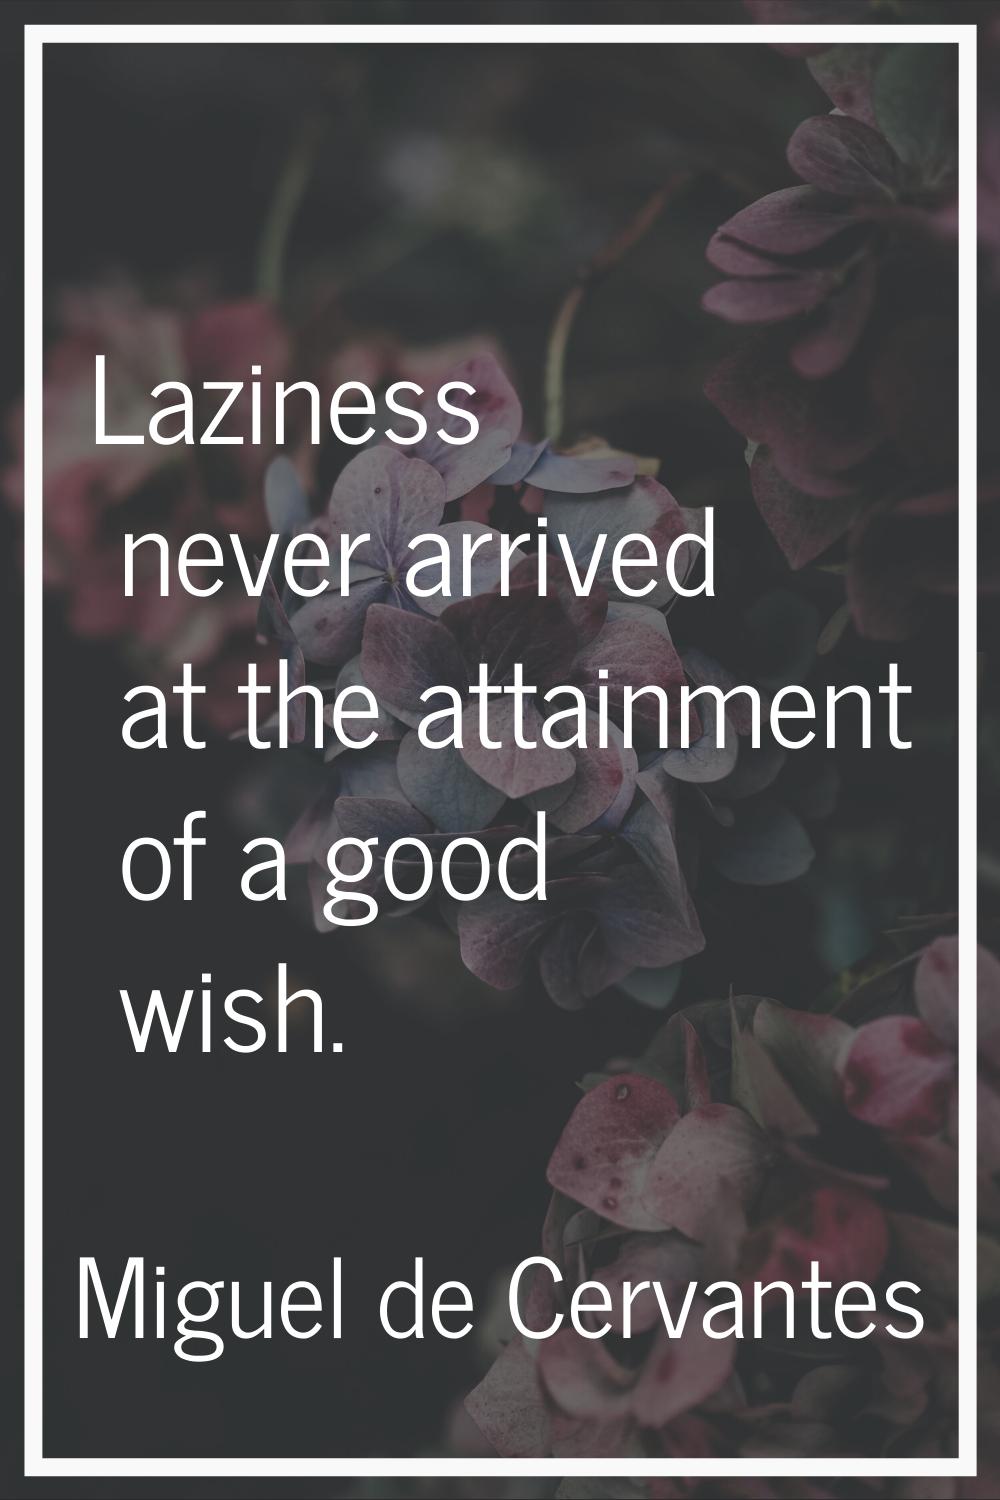 Laziness never arrived at the attainment of a good wish.